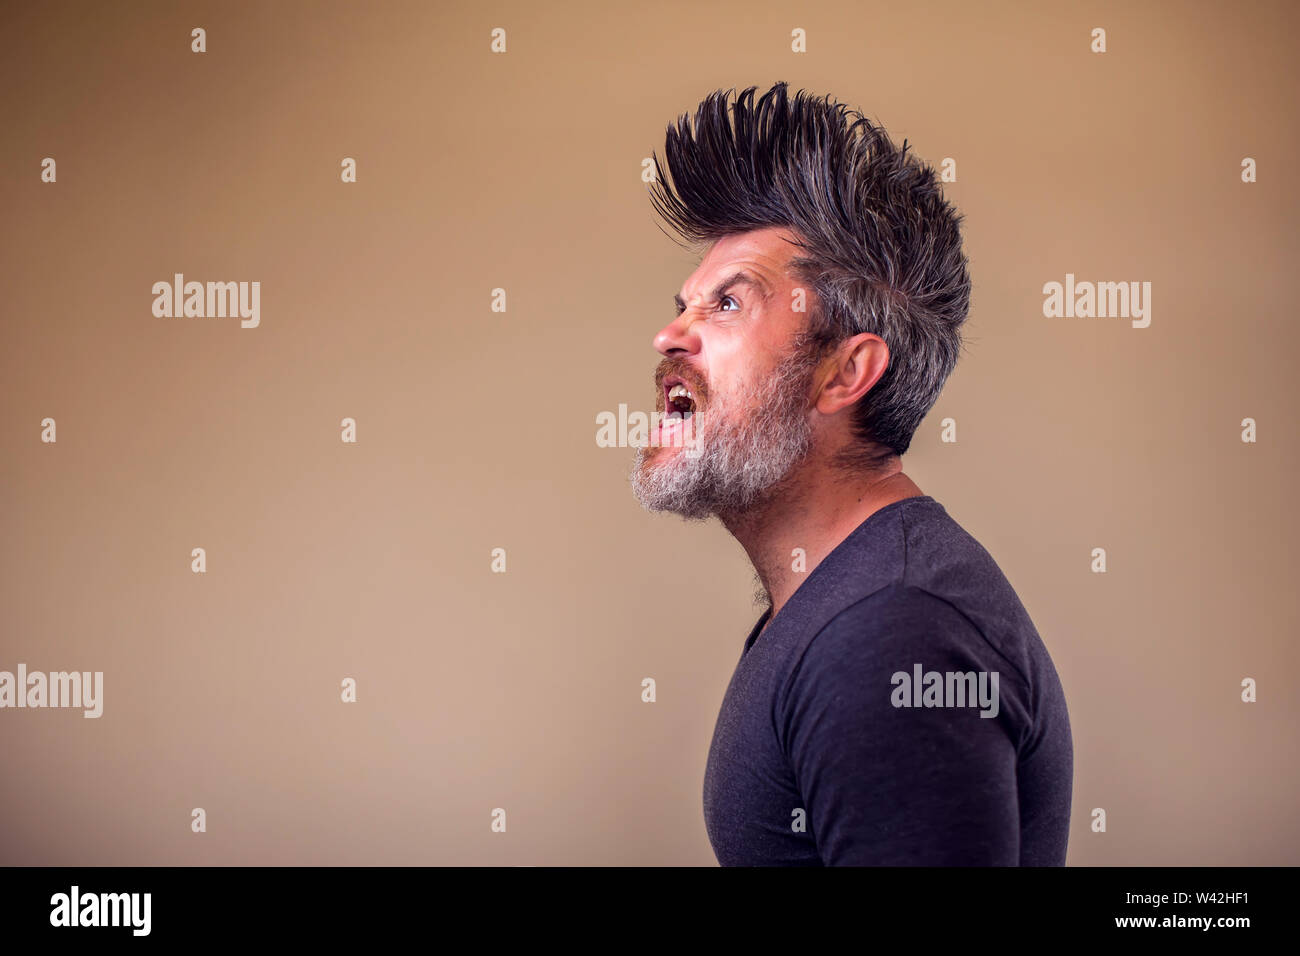 Closeup portrait of an angry adult man with a beard and iroquois. People and emotions concept Stock Photo